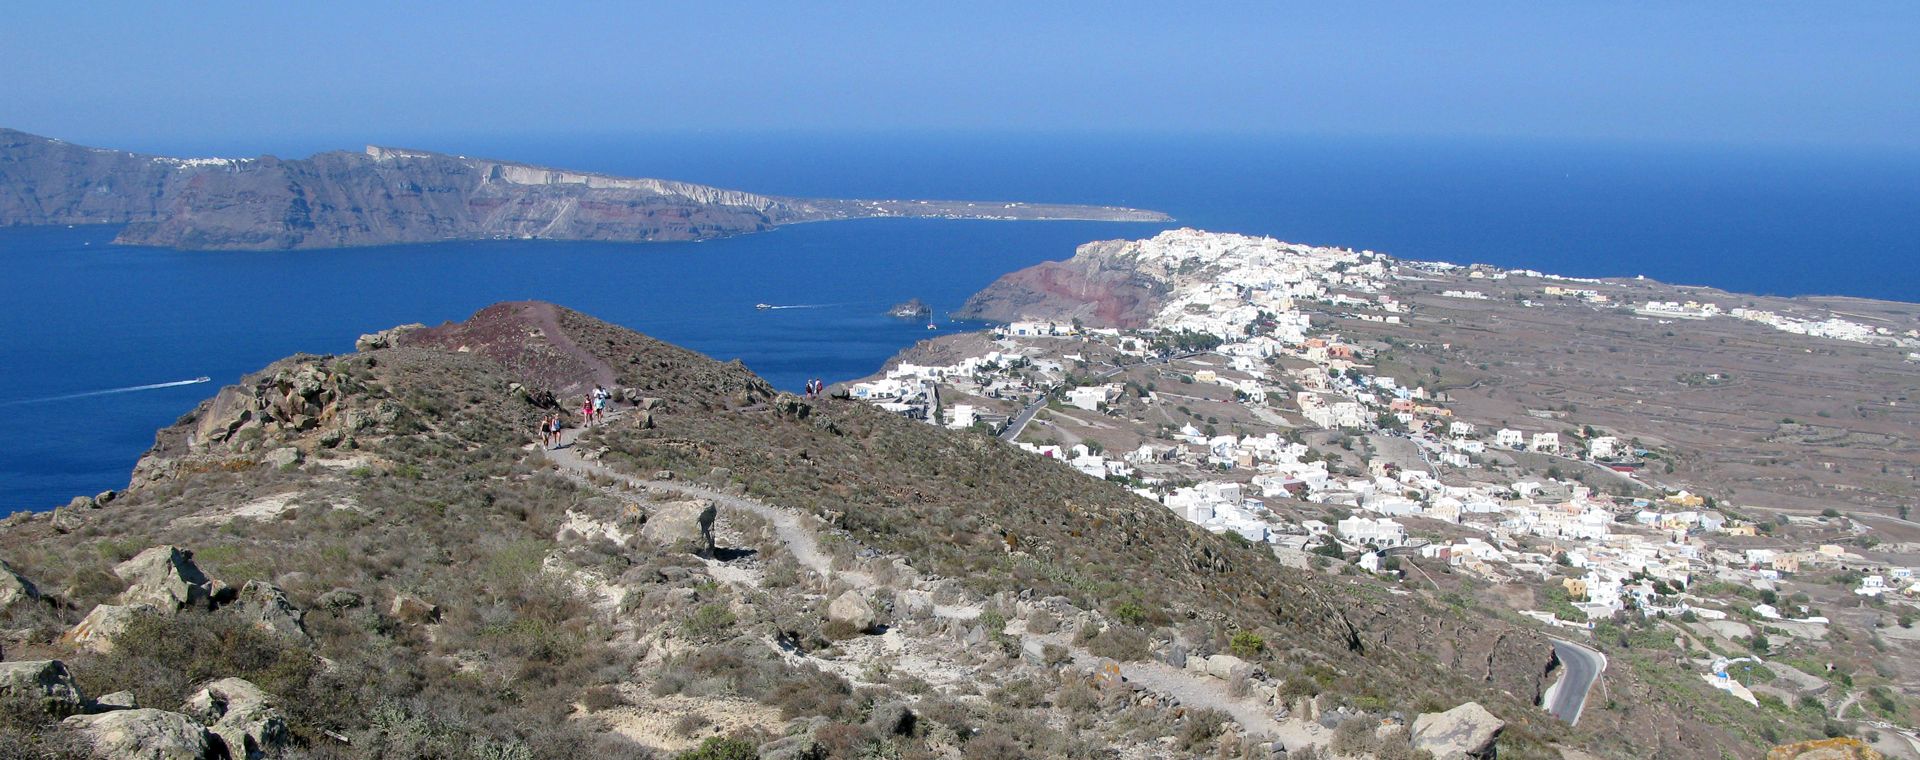 View of the North of the island of Santorini